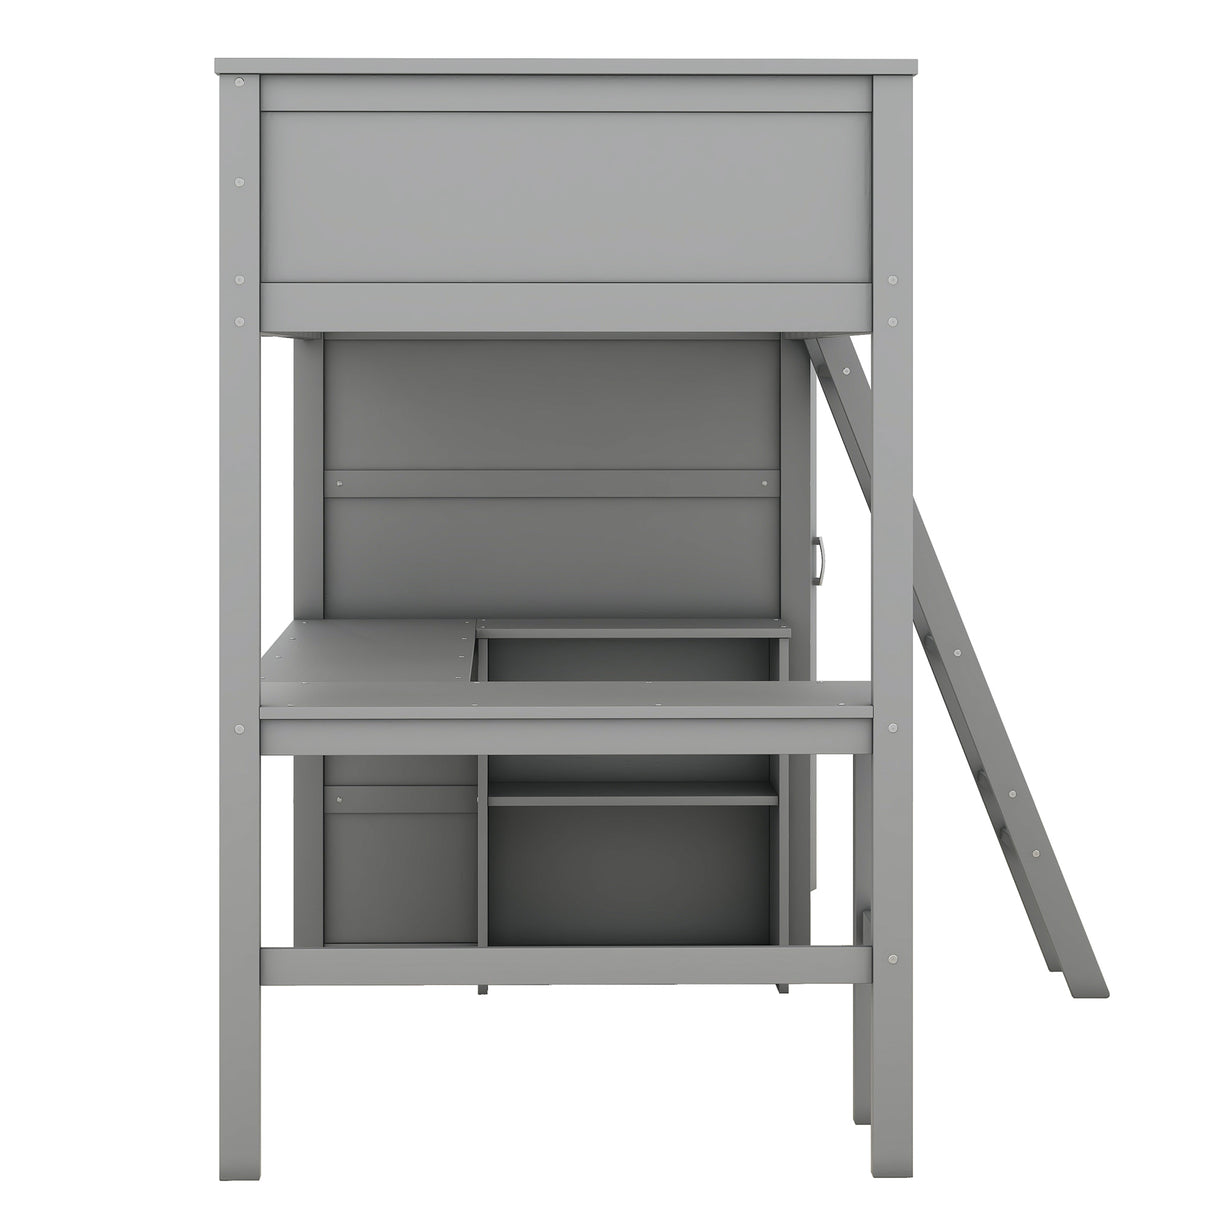 Twin size Loft Bed with Desk, Shelves and Wardrobe-Gray - Home Elegance USA